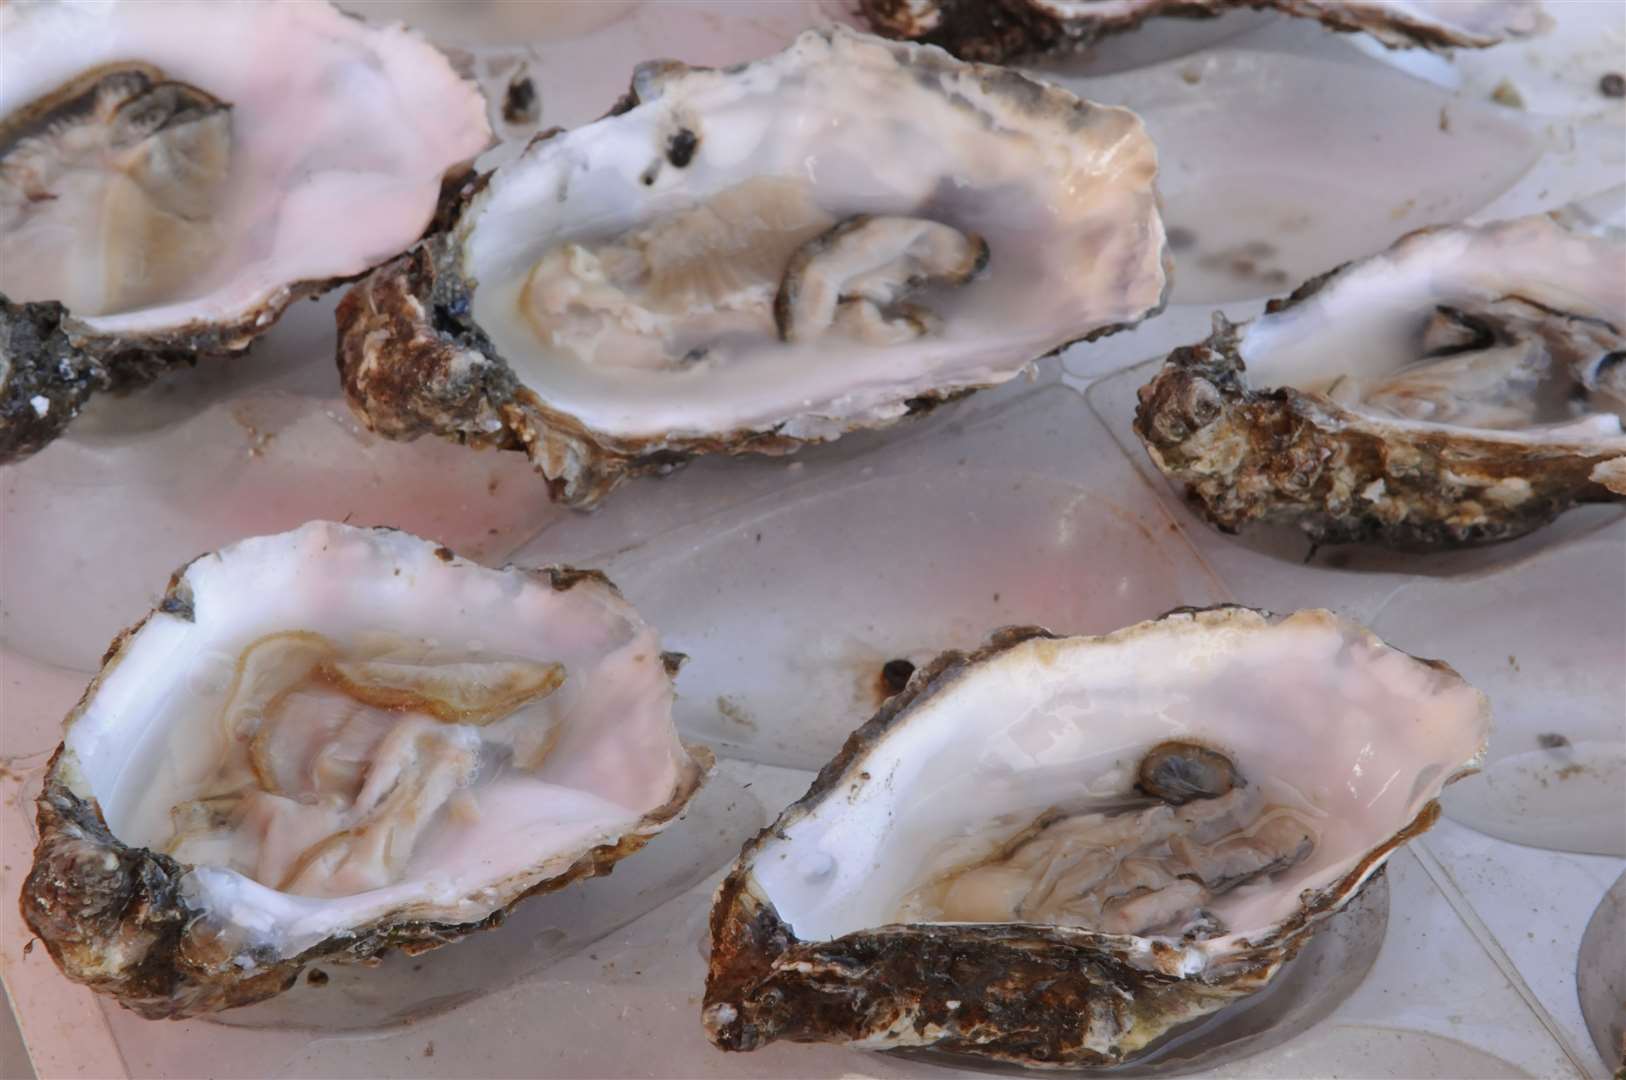 Sales of the Whitstable delicacy were halted in June and July following the reports of sickness